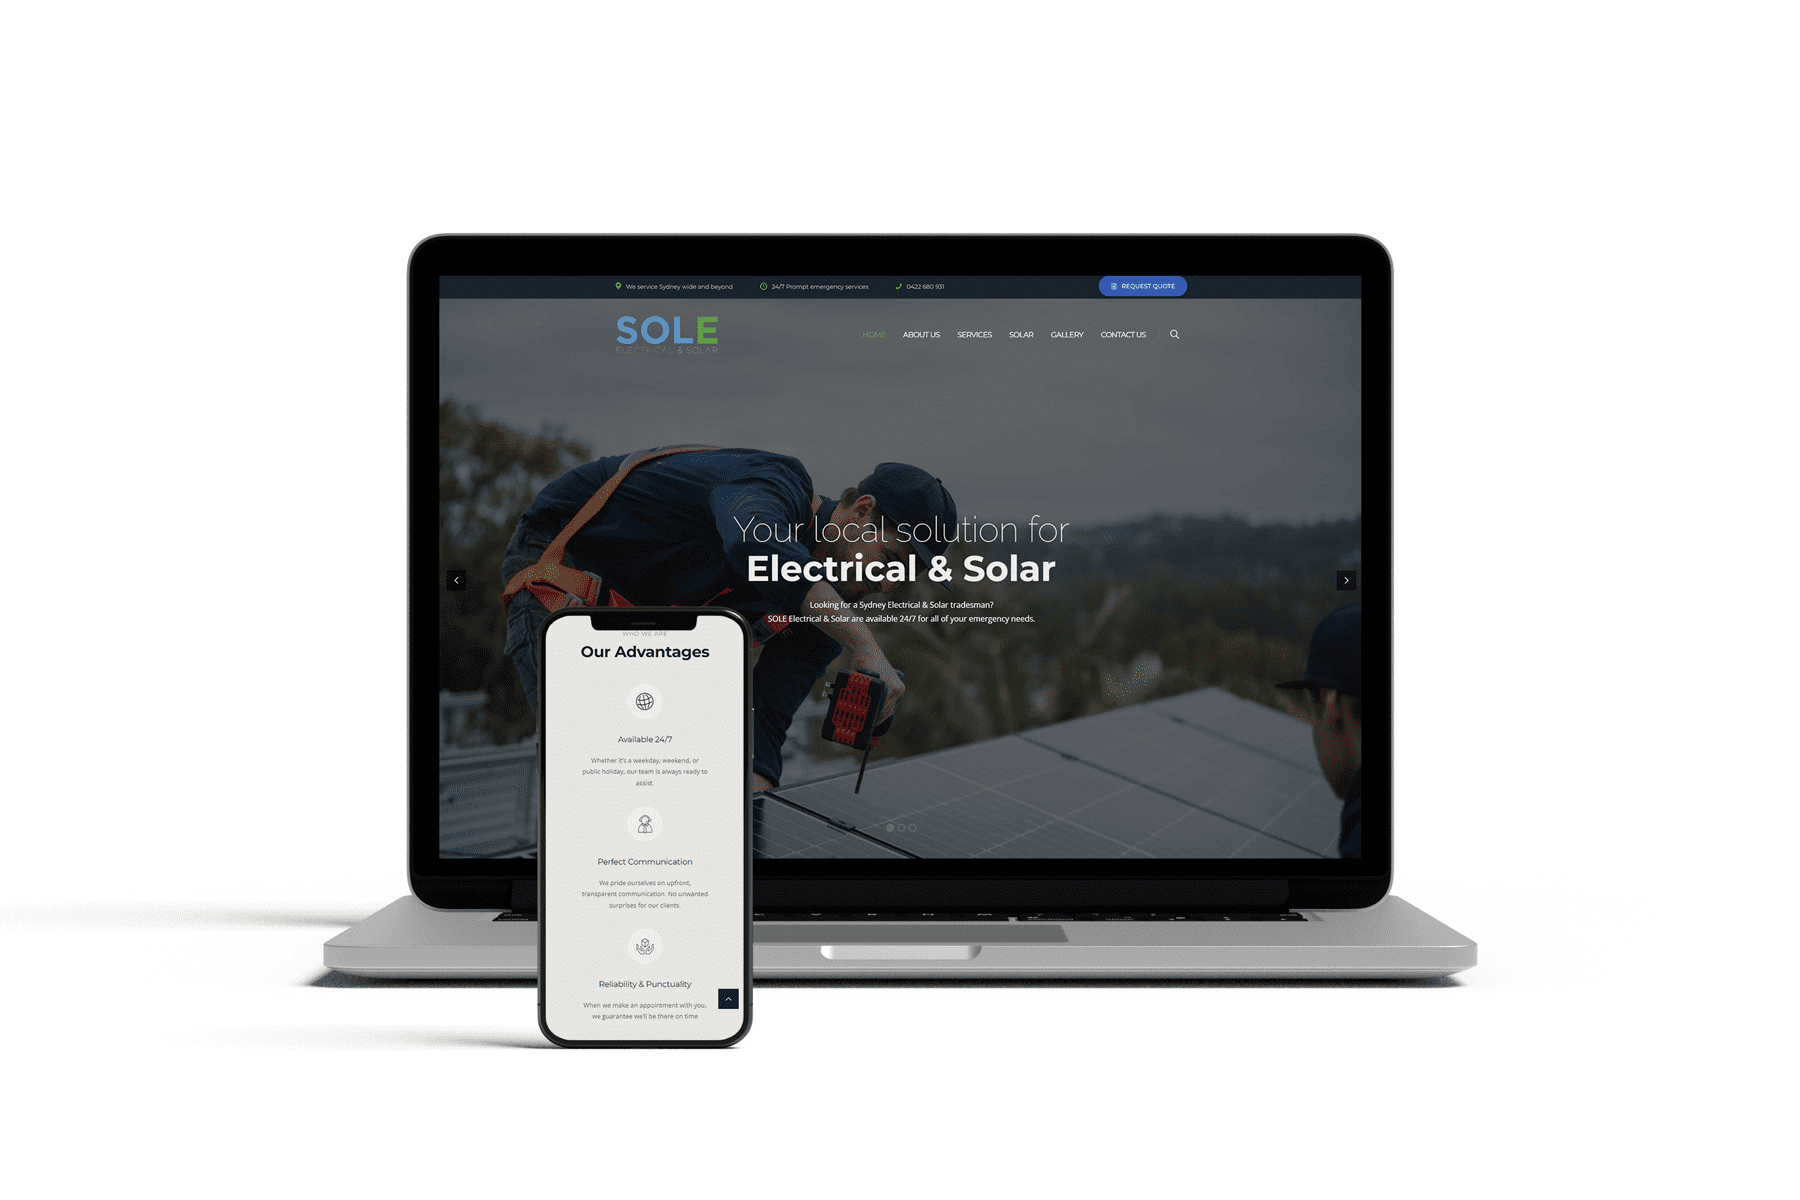 laptop and iphone mockup of sole website